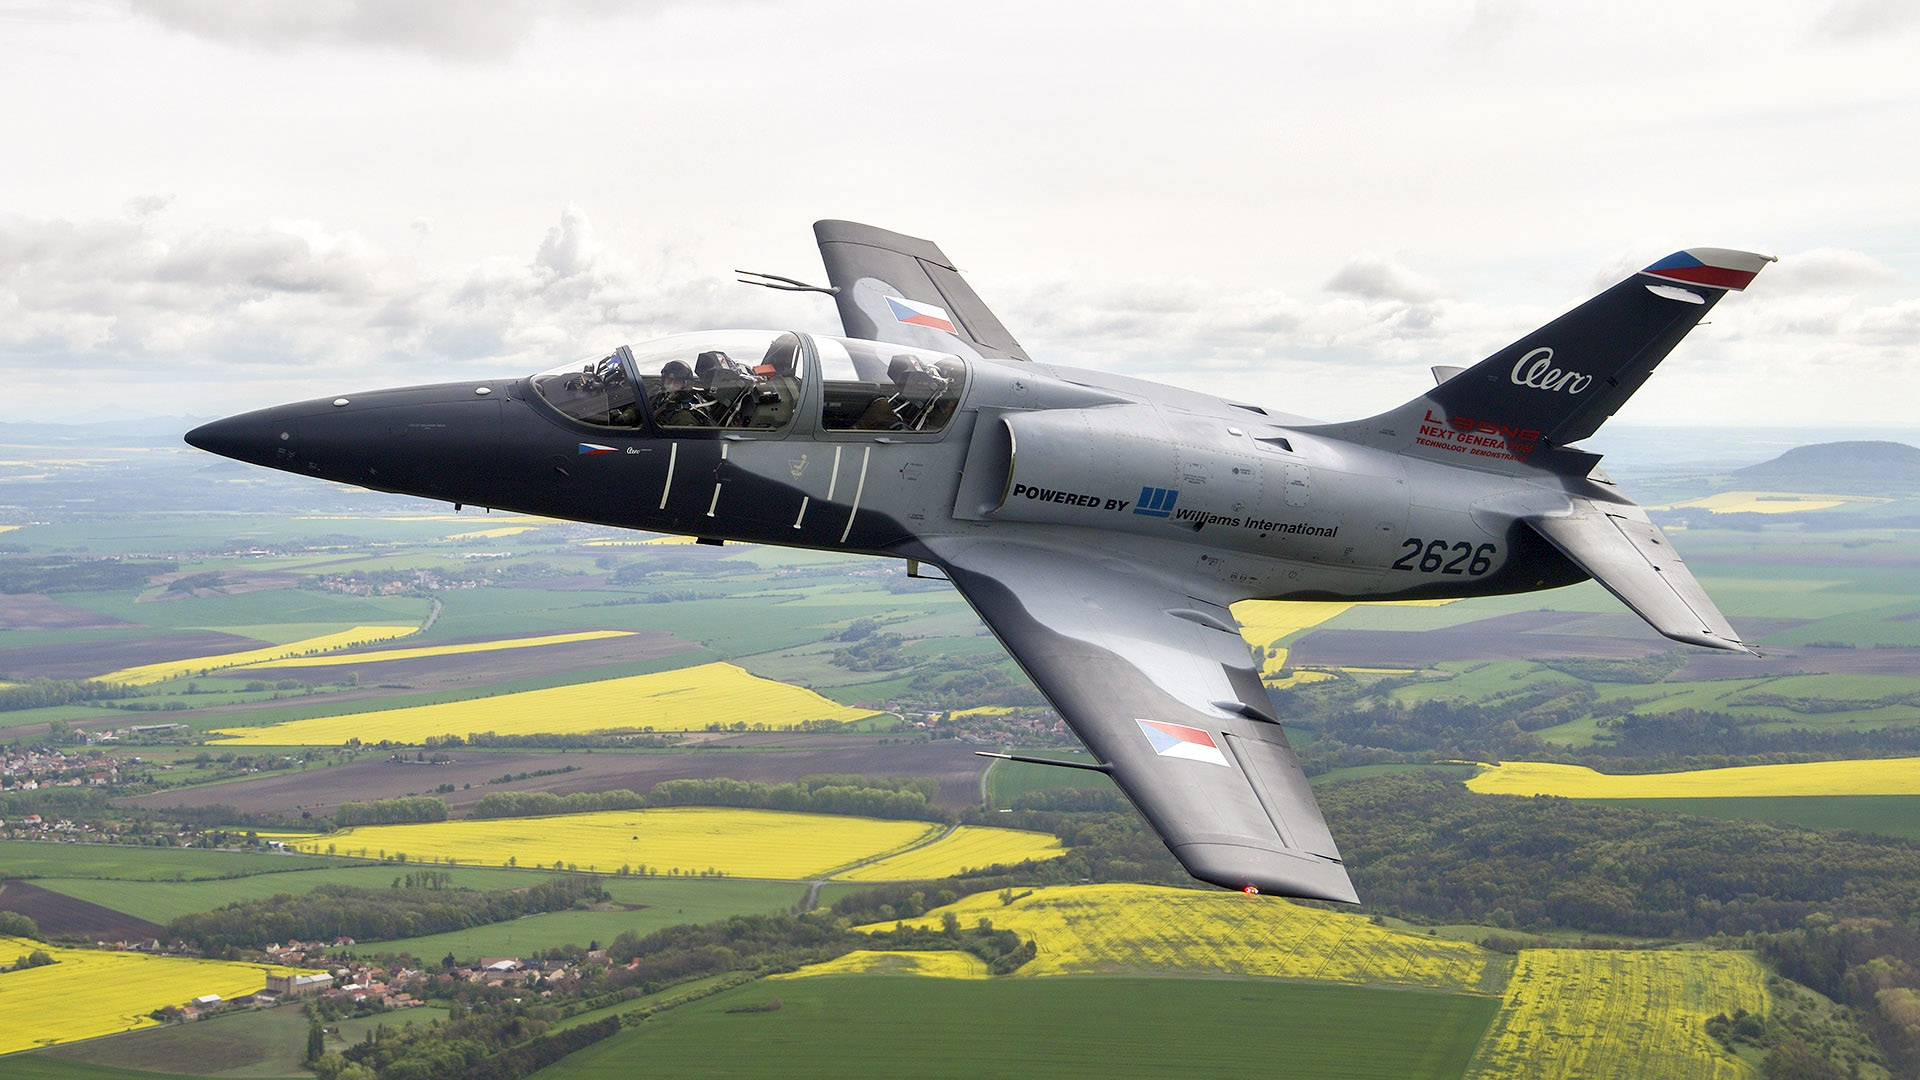 The new Czech jet aircraft L-39NG rolled out - Armada International